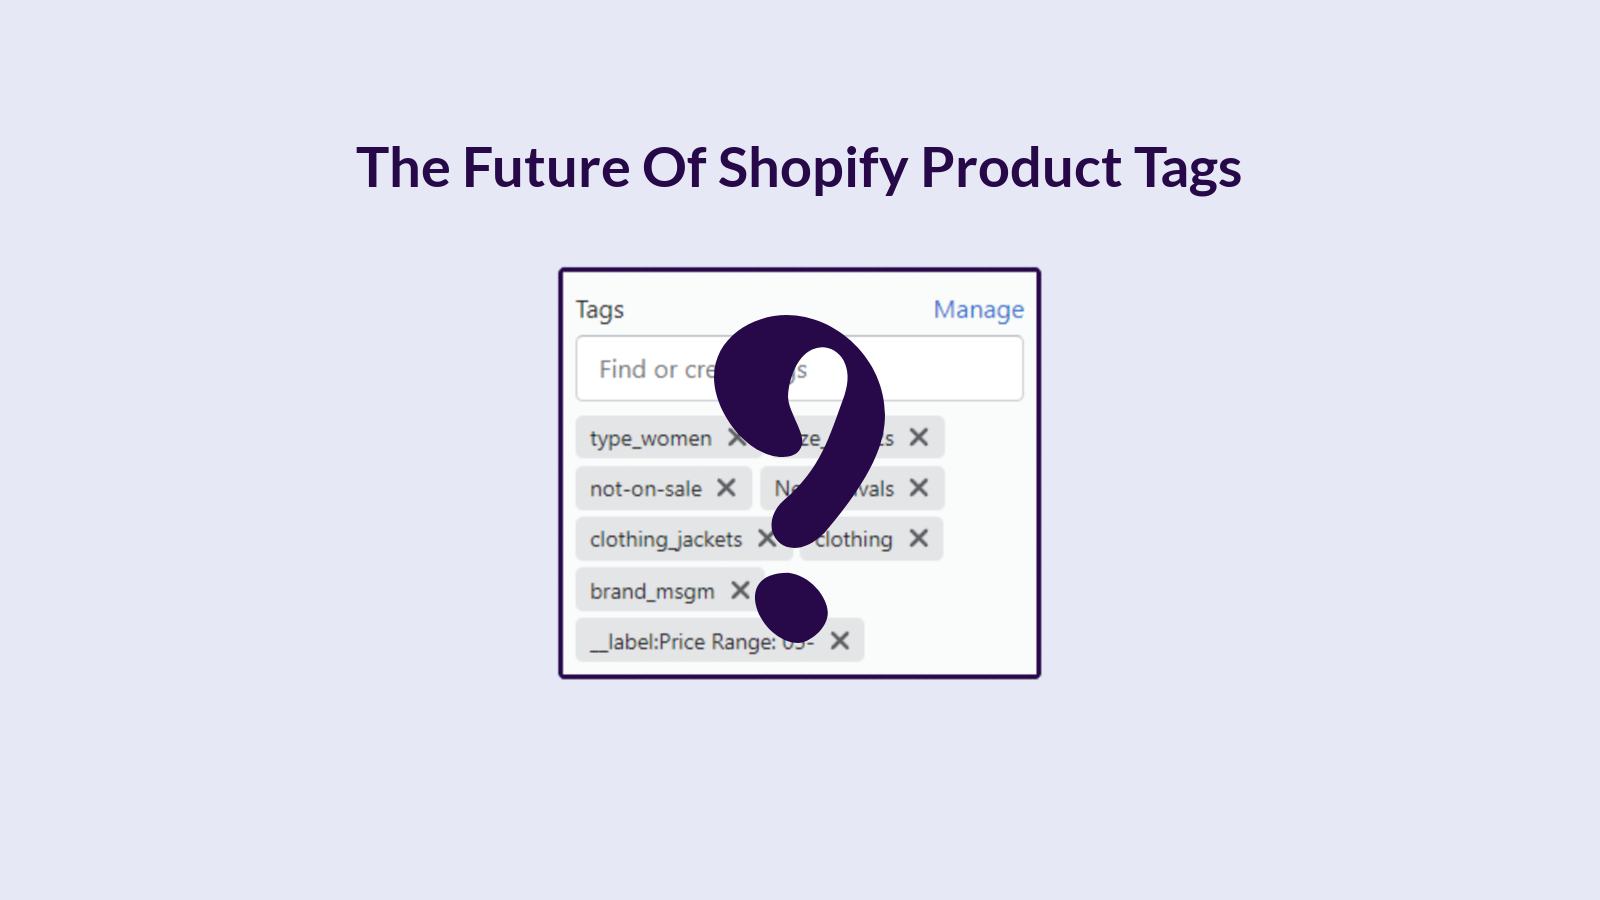 The Future Of Shopify Product Tags